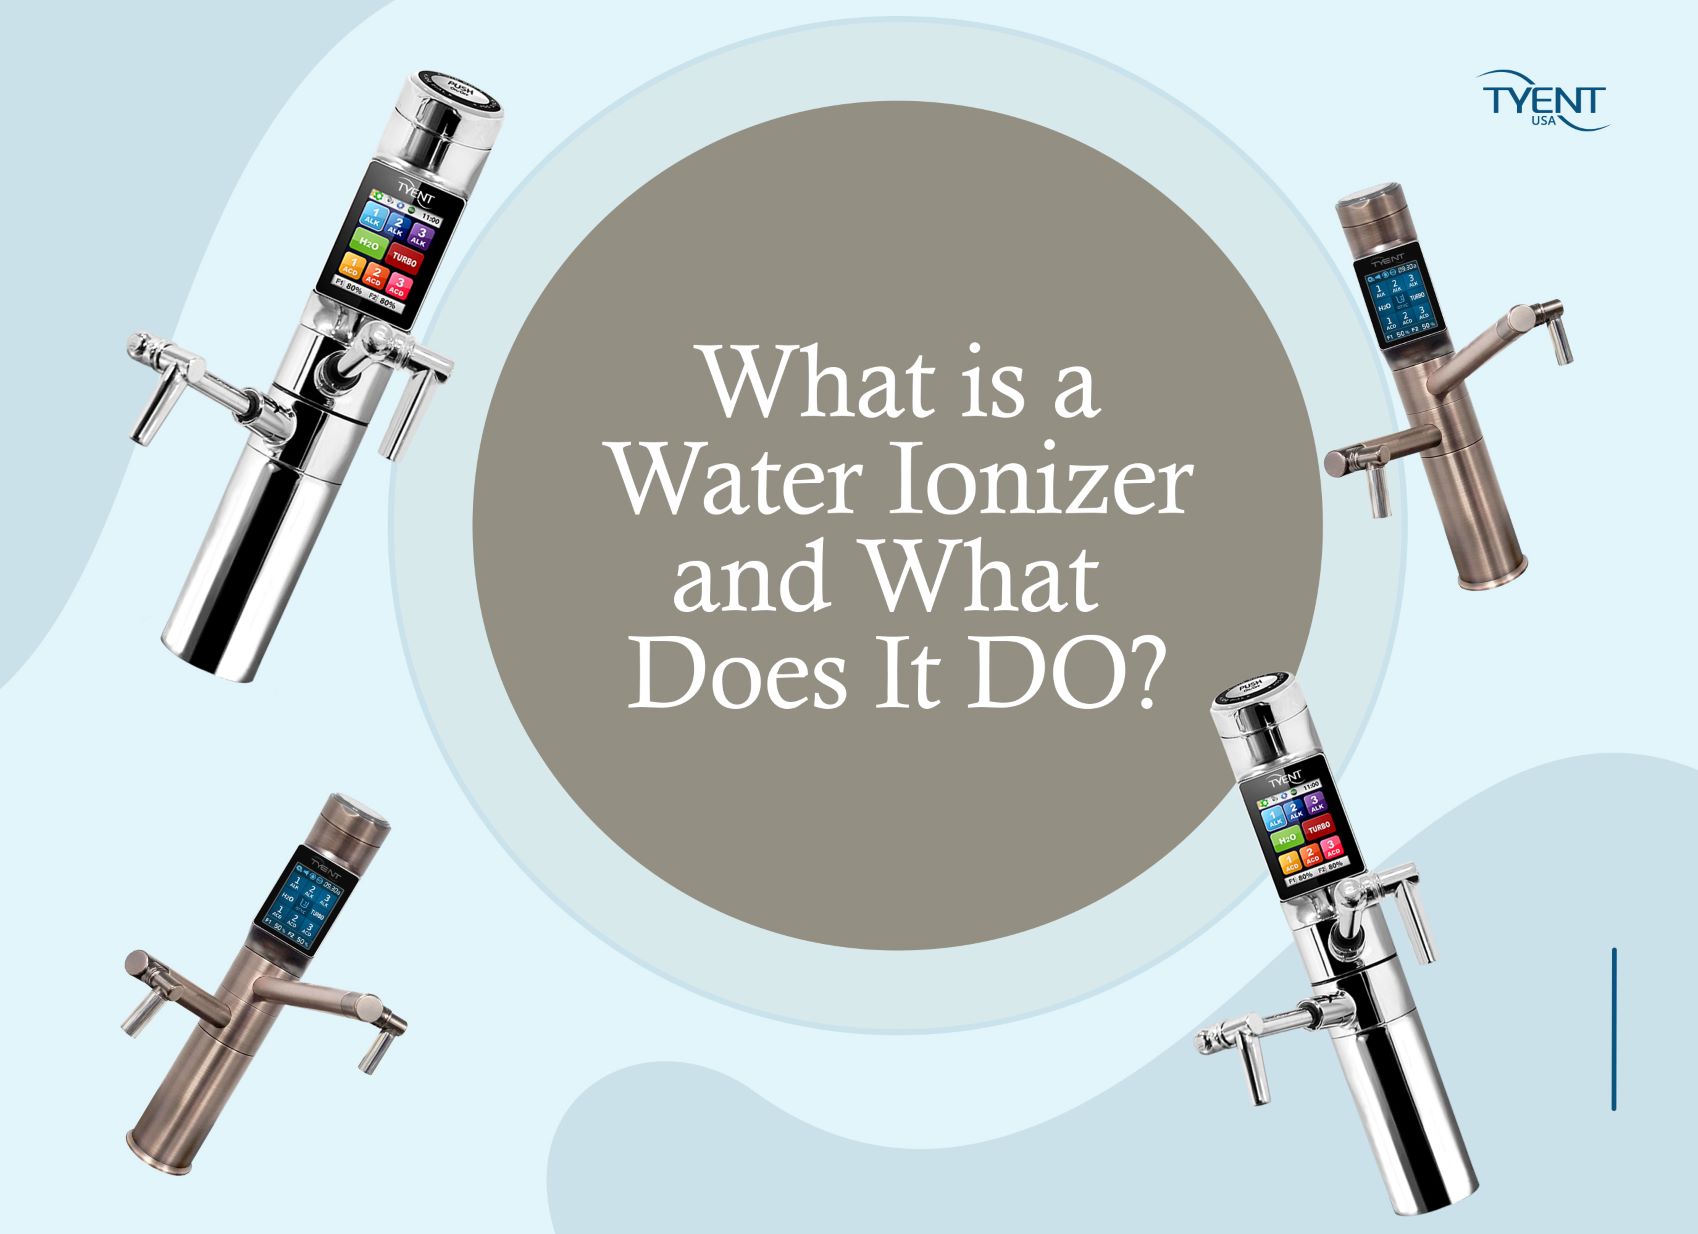 What Is a Water Ionizer and What Does It Do